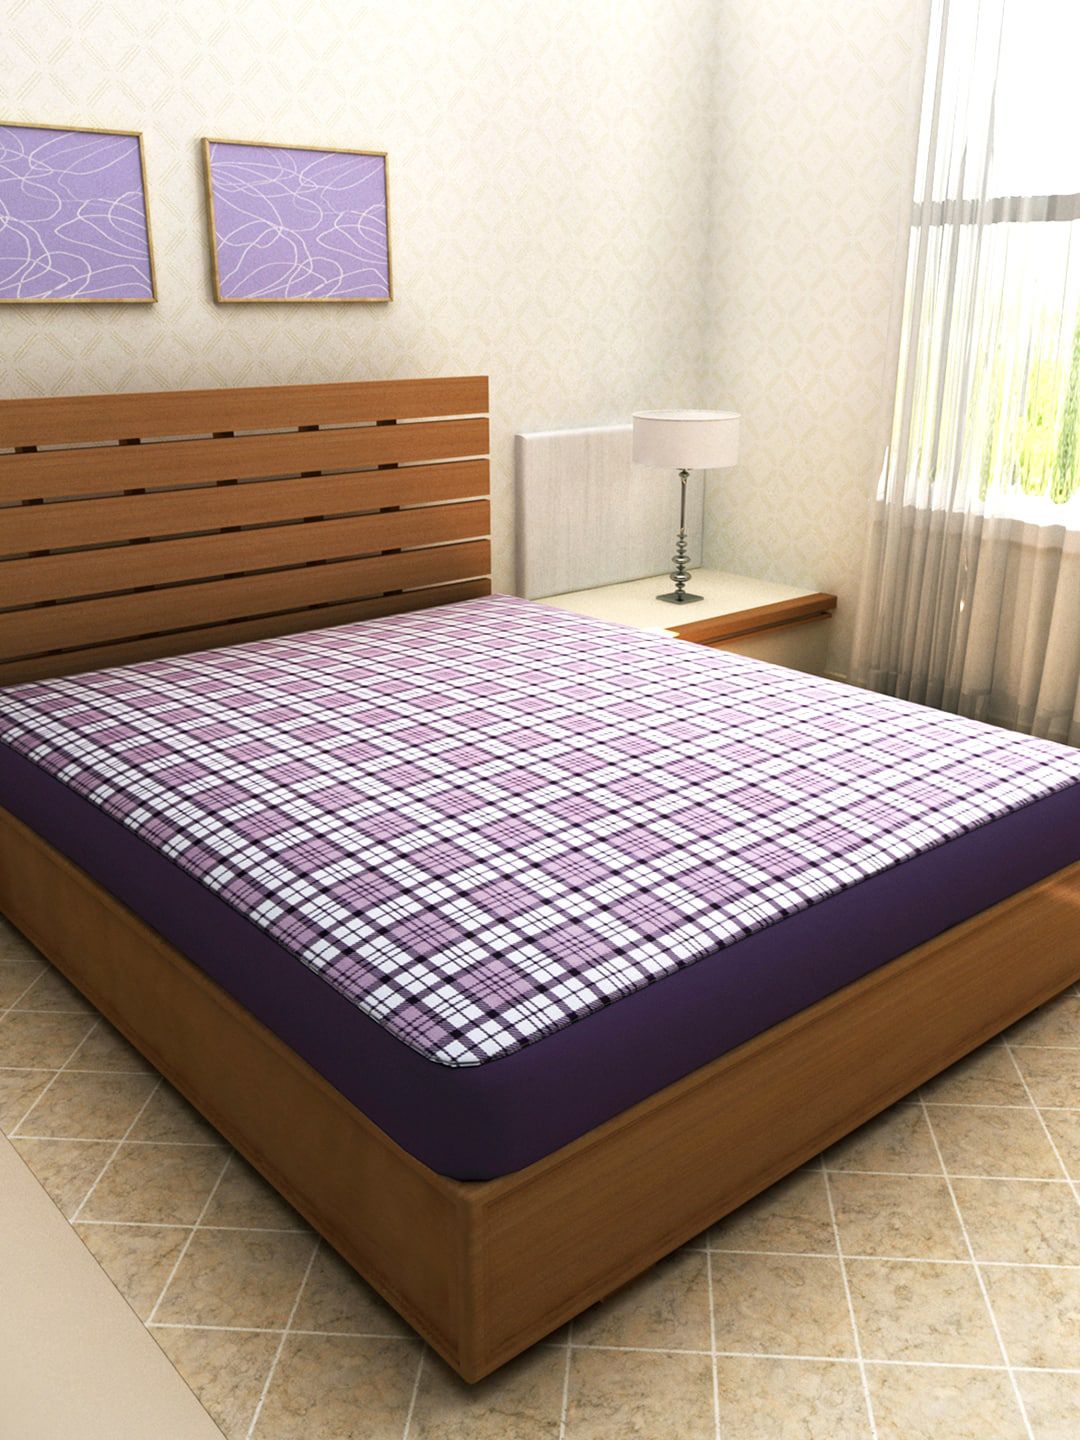 ROMEE Unisex Purple & White King Size Mattress Protector Price in India